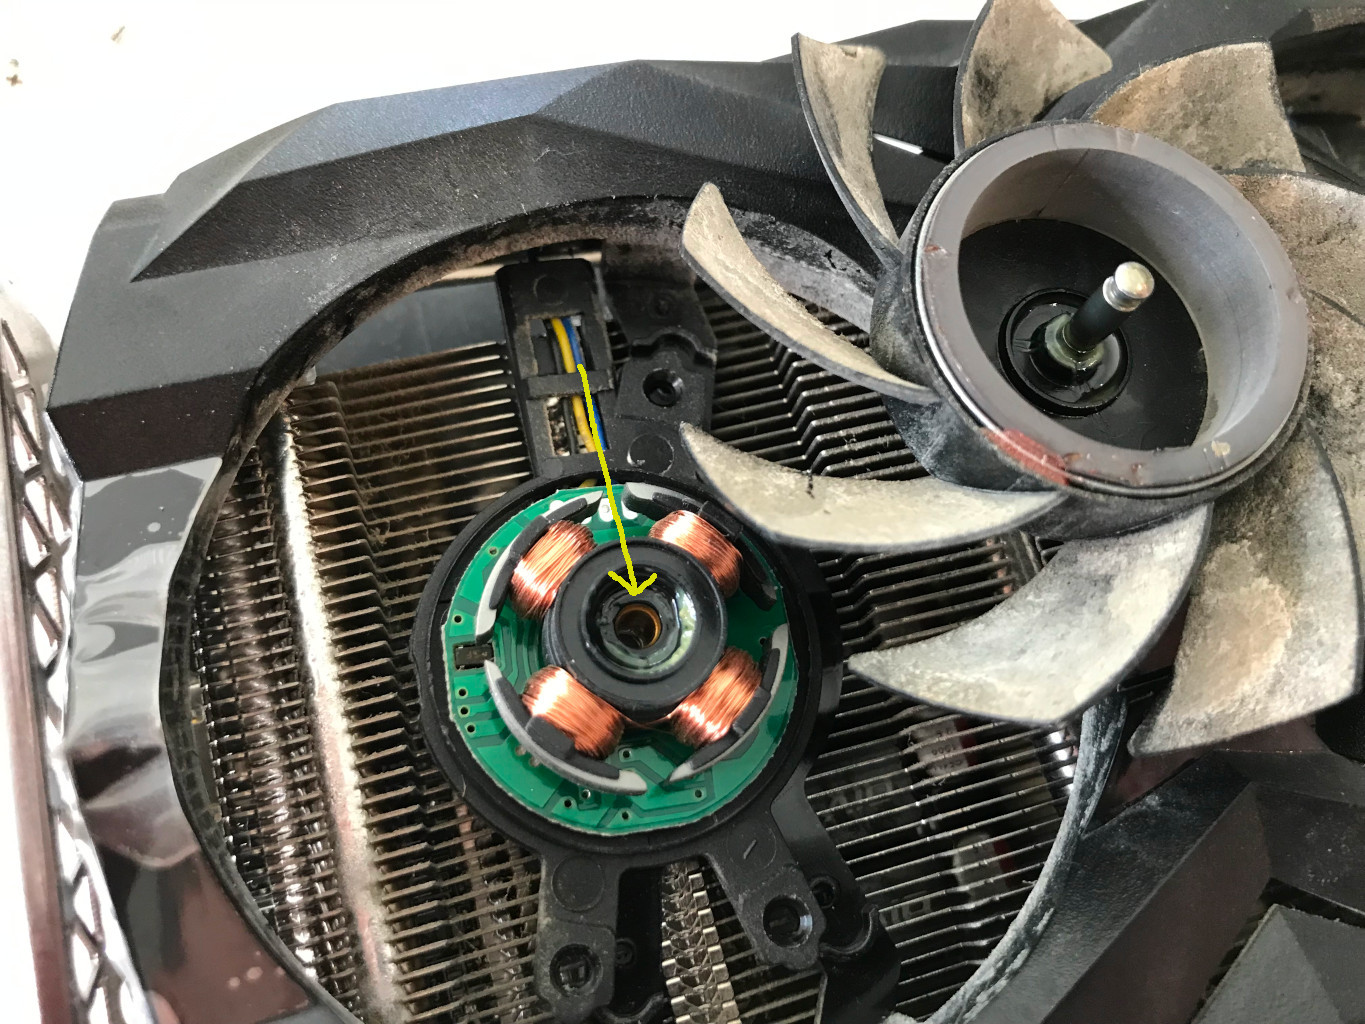 Oiling up the buzzing fans on the Zotac GeForce 1660 SUPER